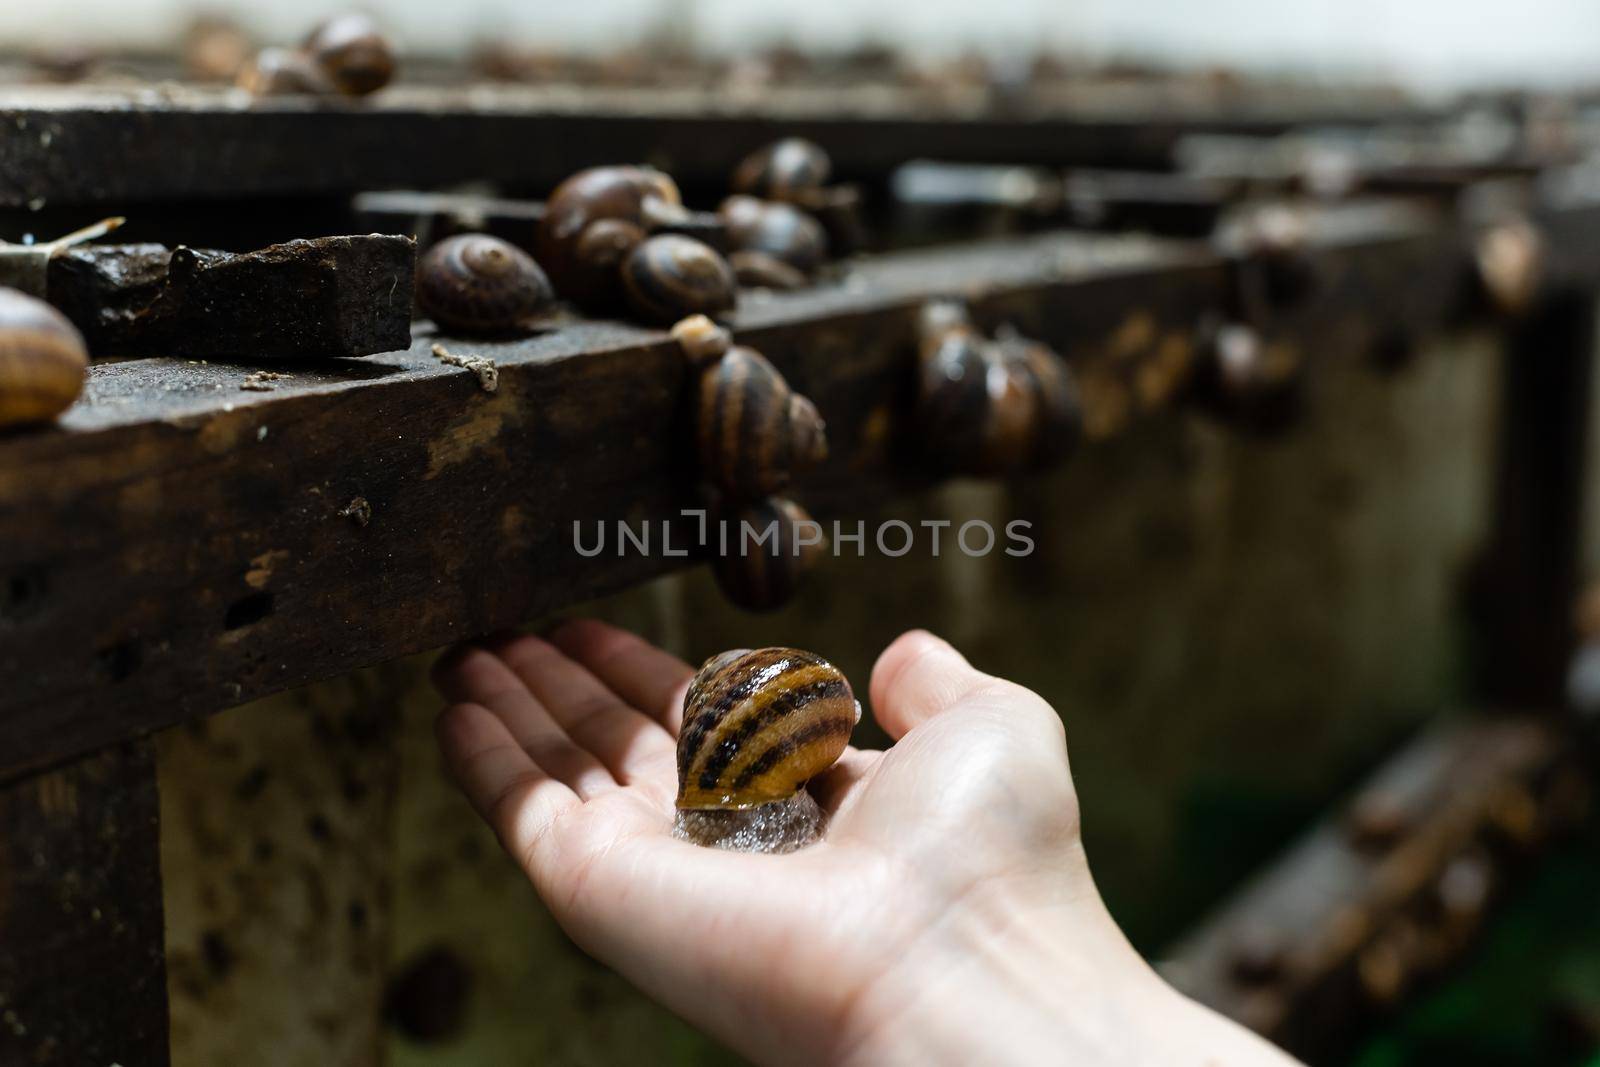 Oversized snail with shell hold by a woman's hand.